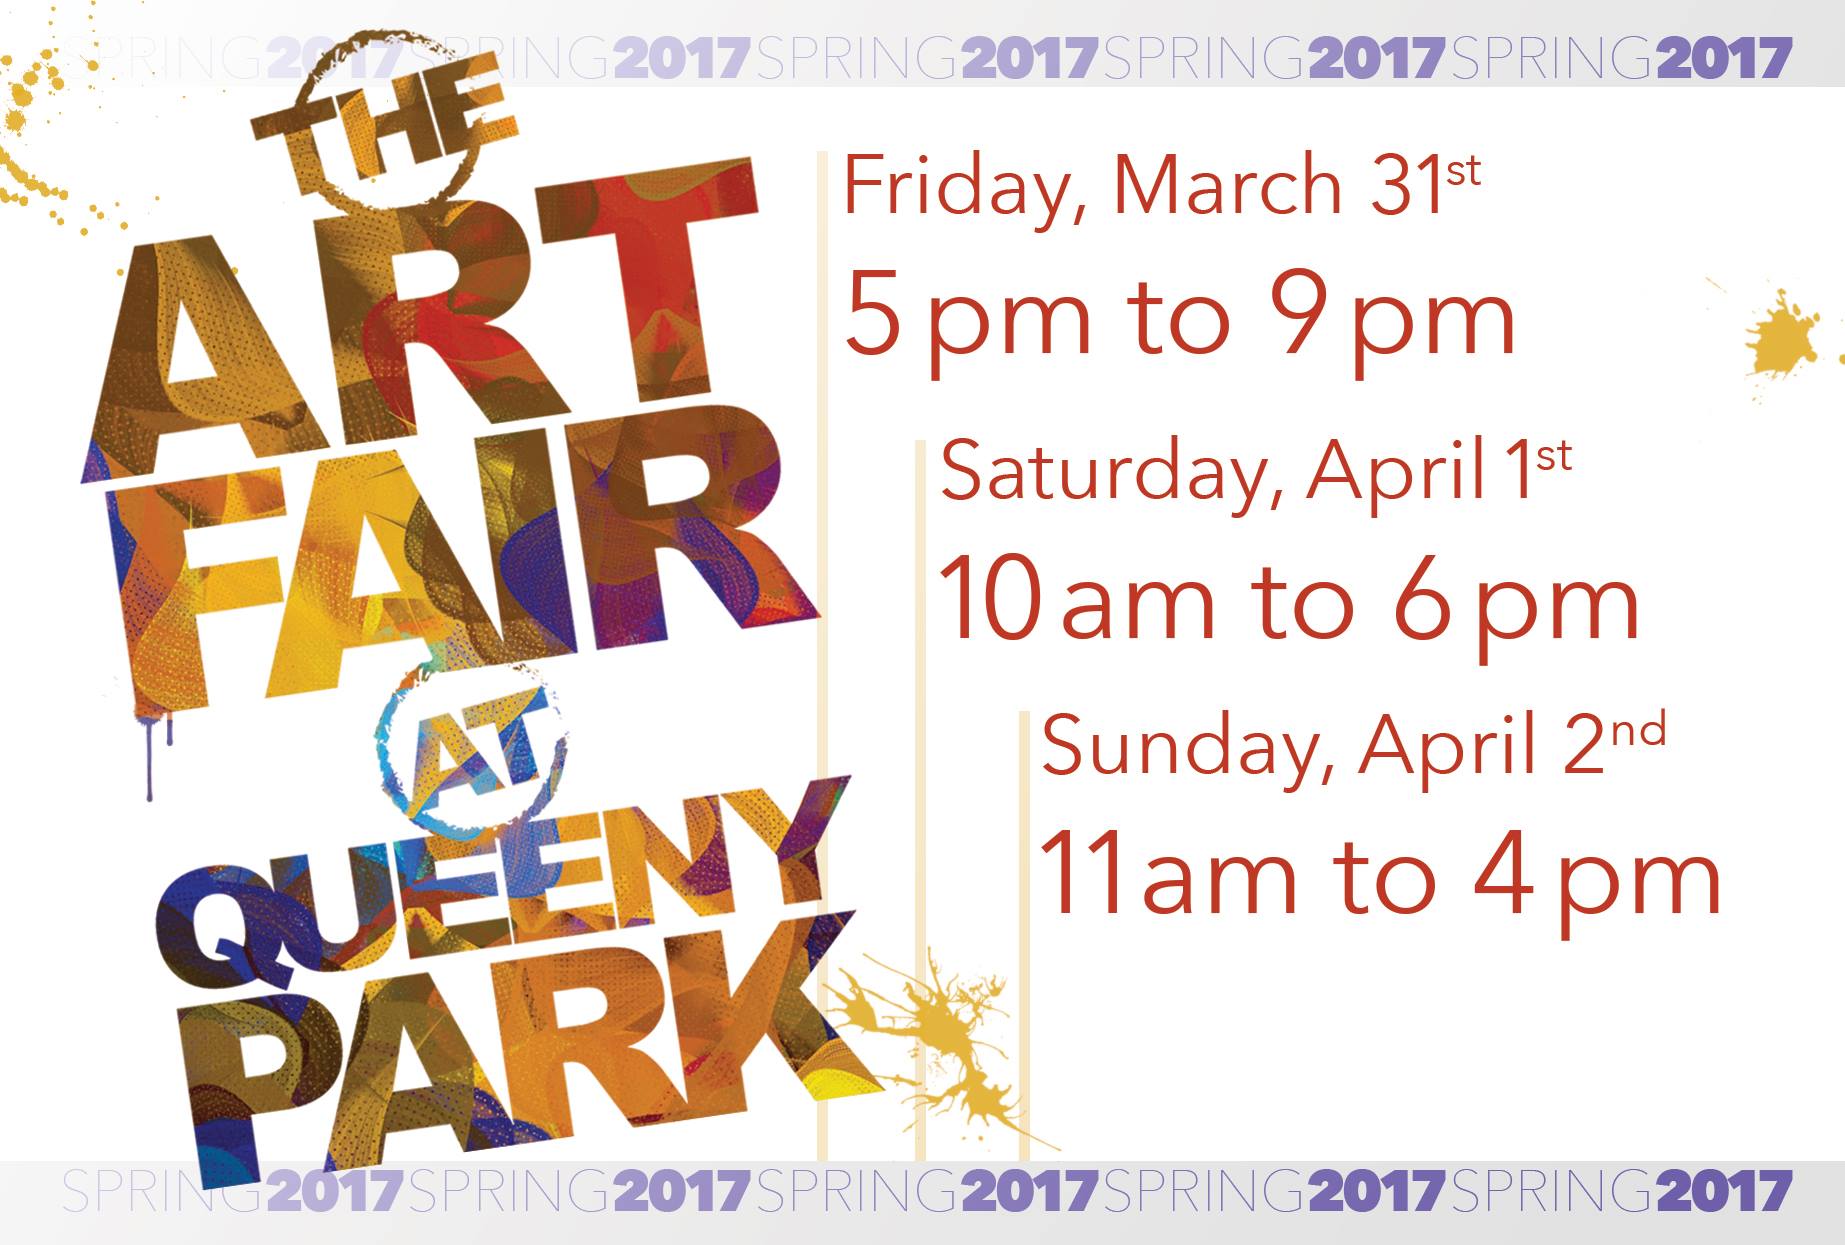 The Art Fair at Queeny Park